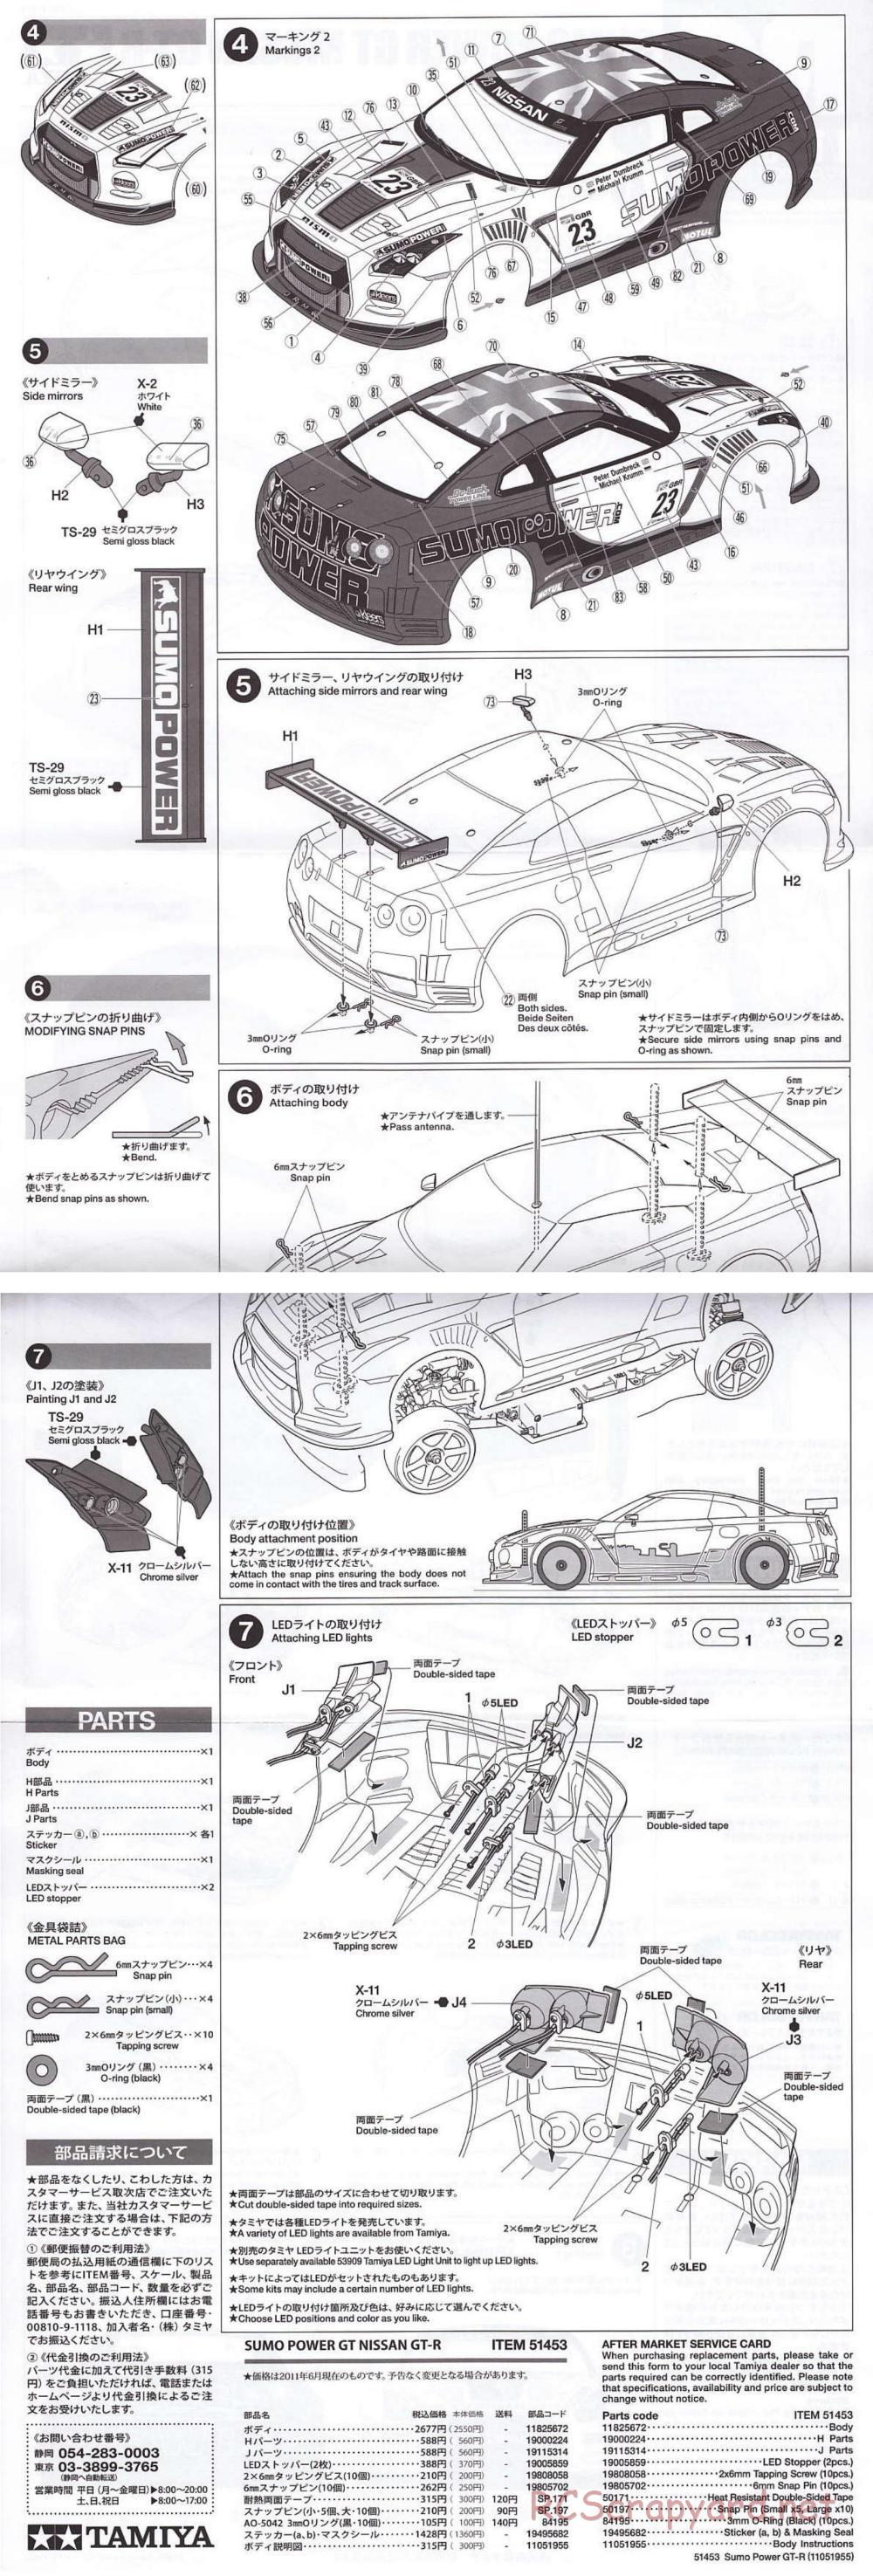 Tamiya - Sumo Power GT Nissan GT-R - TA06 Chassis - Body Manual - Page 2